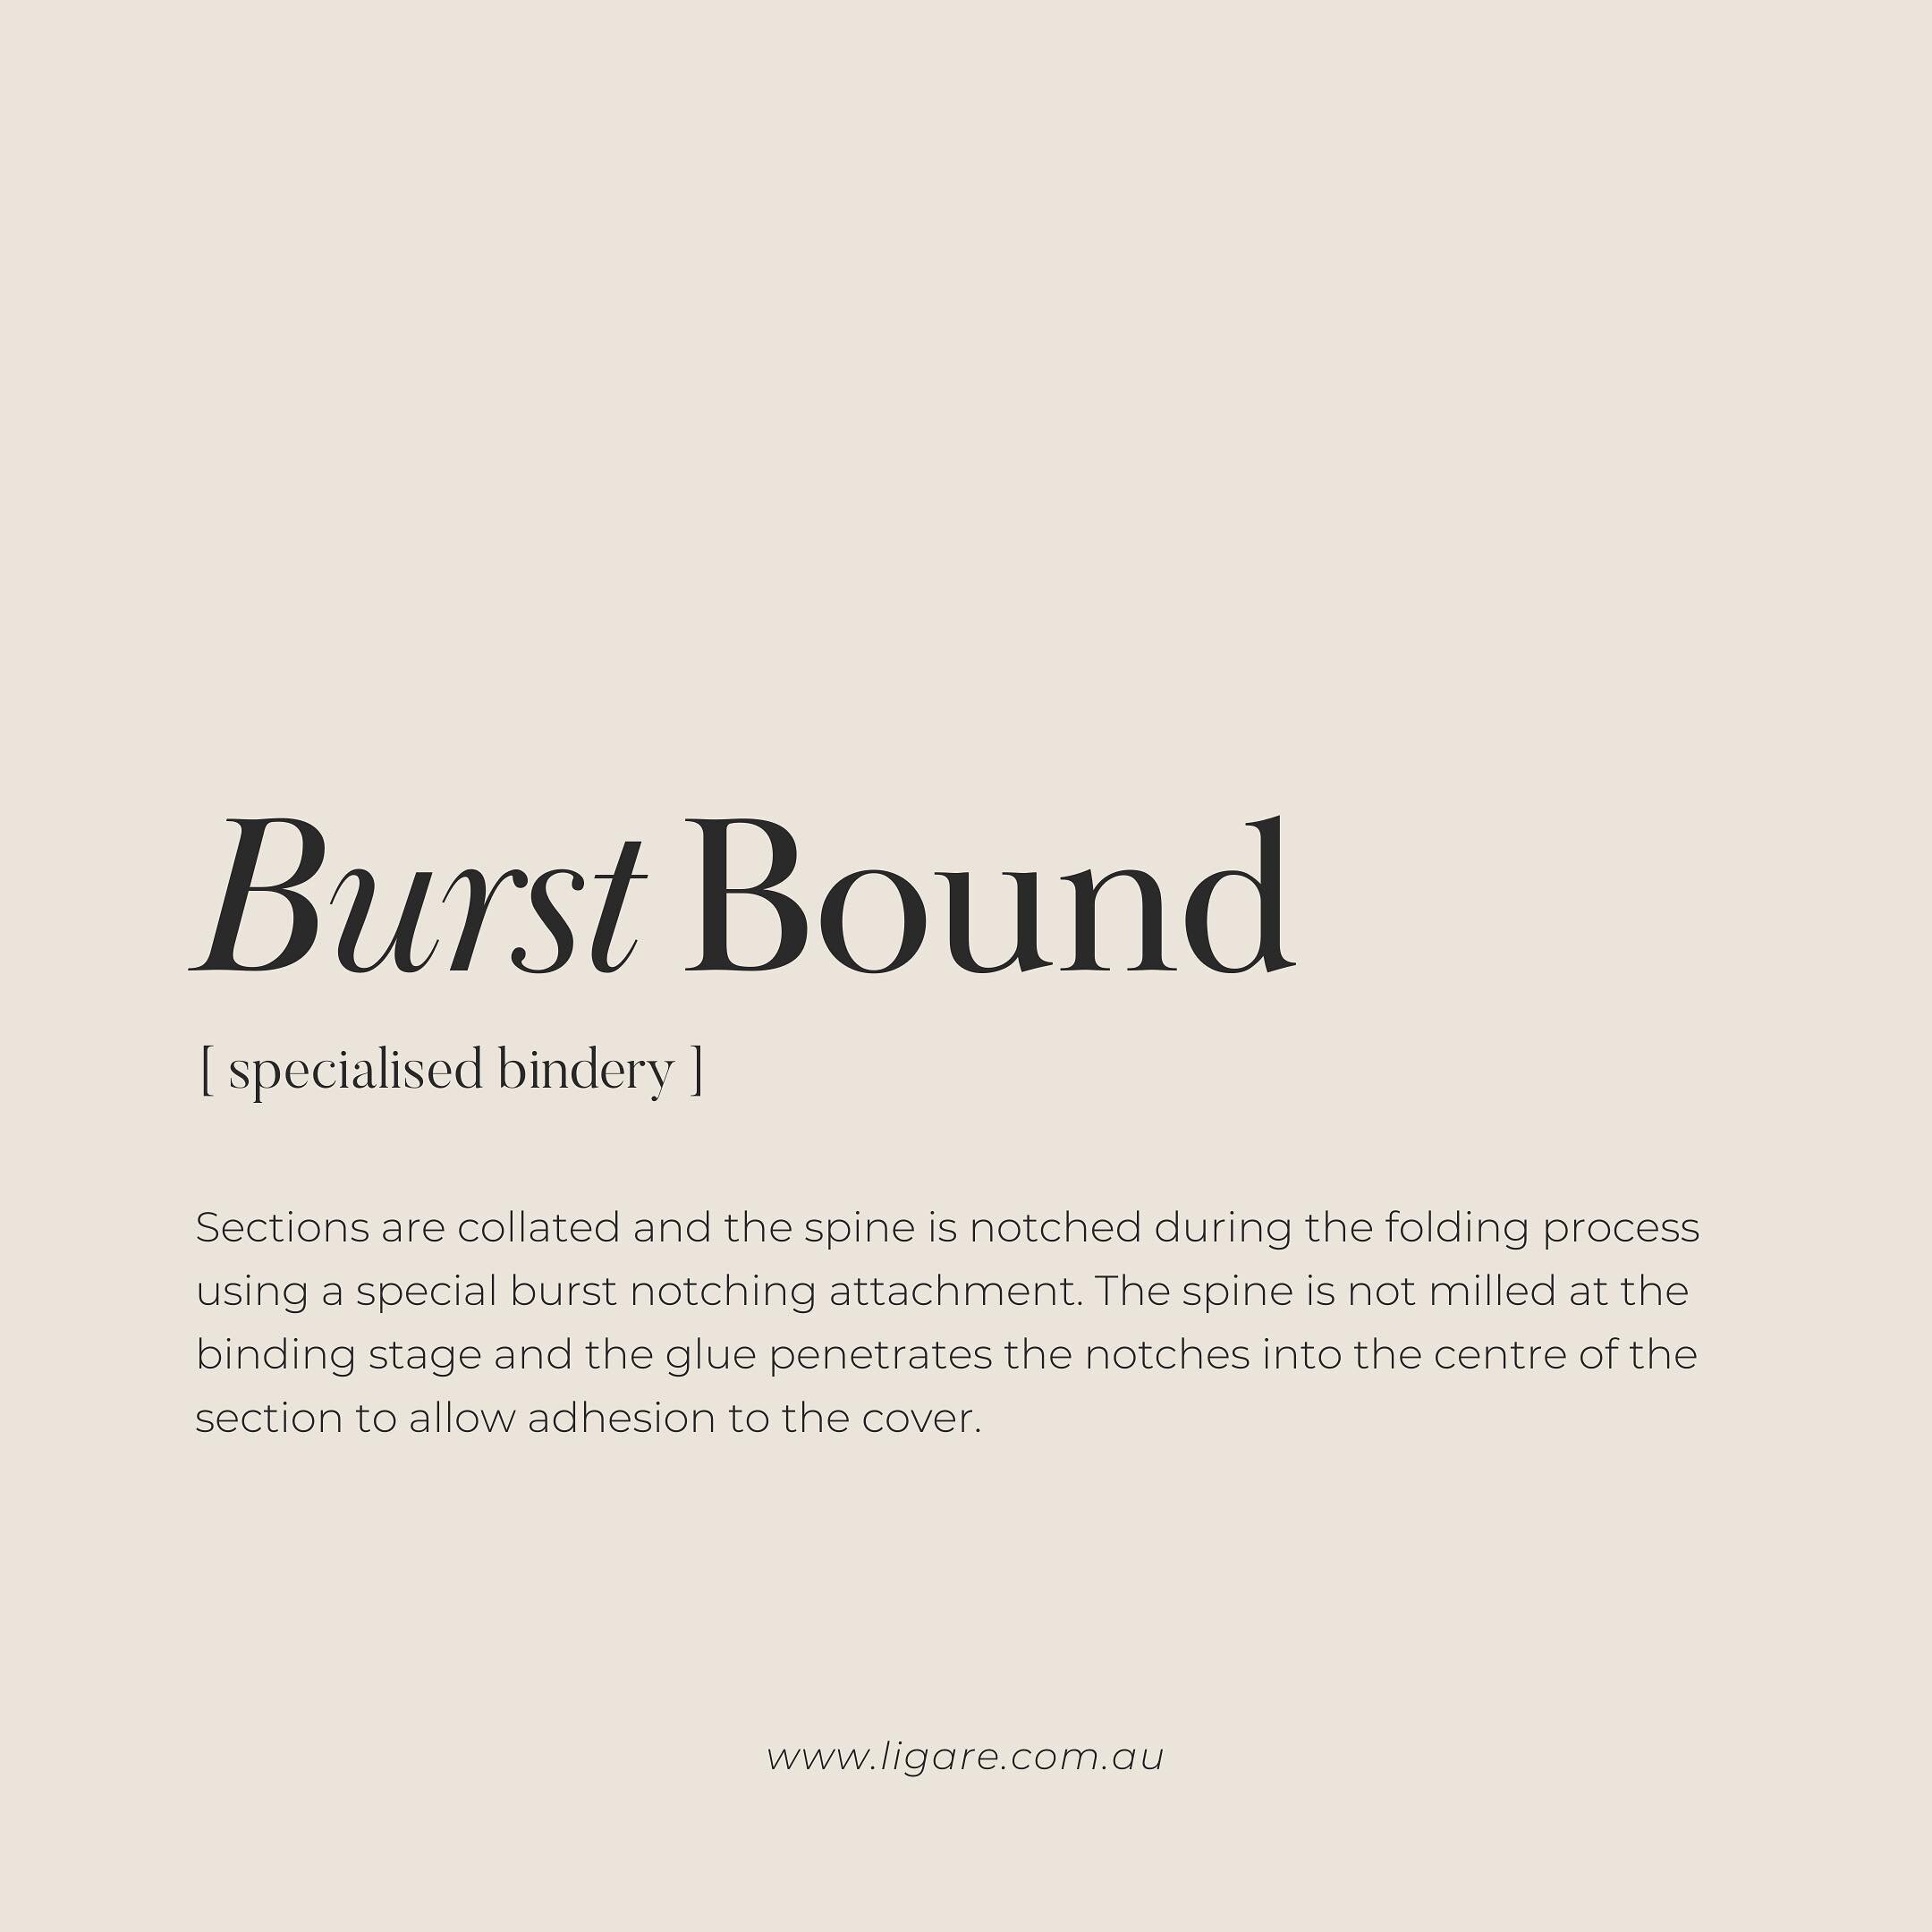 Burst Bound 📕 

Sections are collated and the spine is notched during the folding process using a special burst notching attachment. 

The spine is not milled at the binding stage and the glue penetrates the notches into the centre of the section to